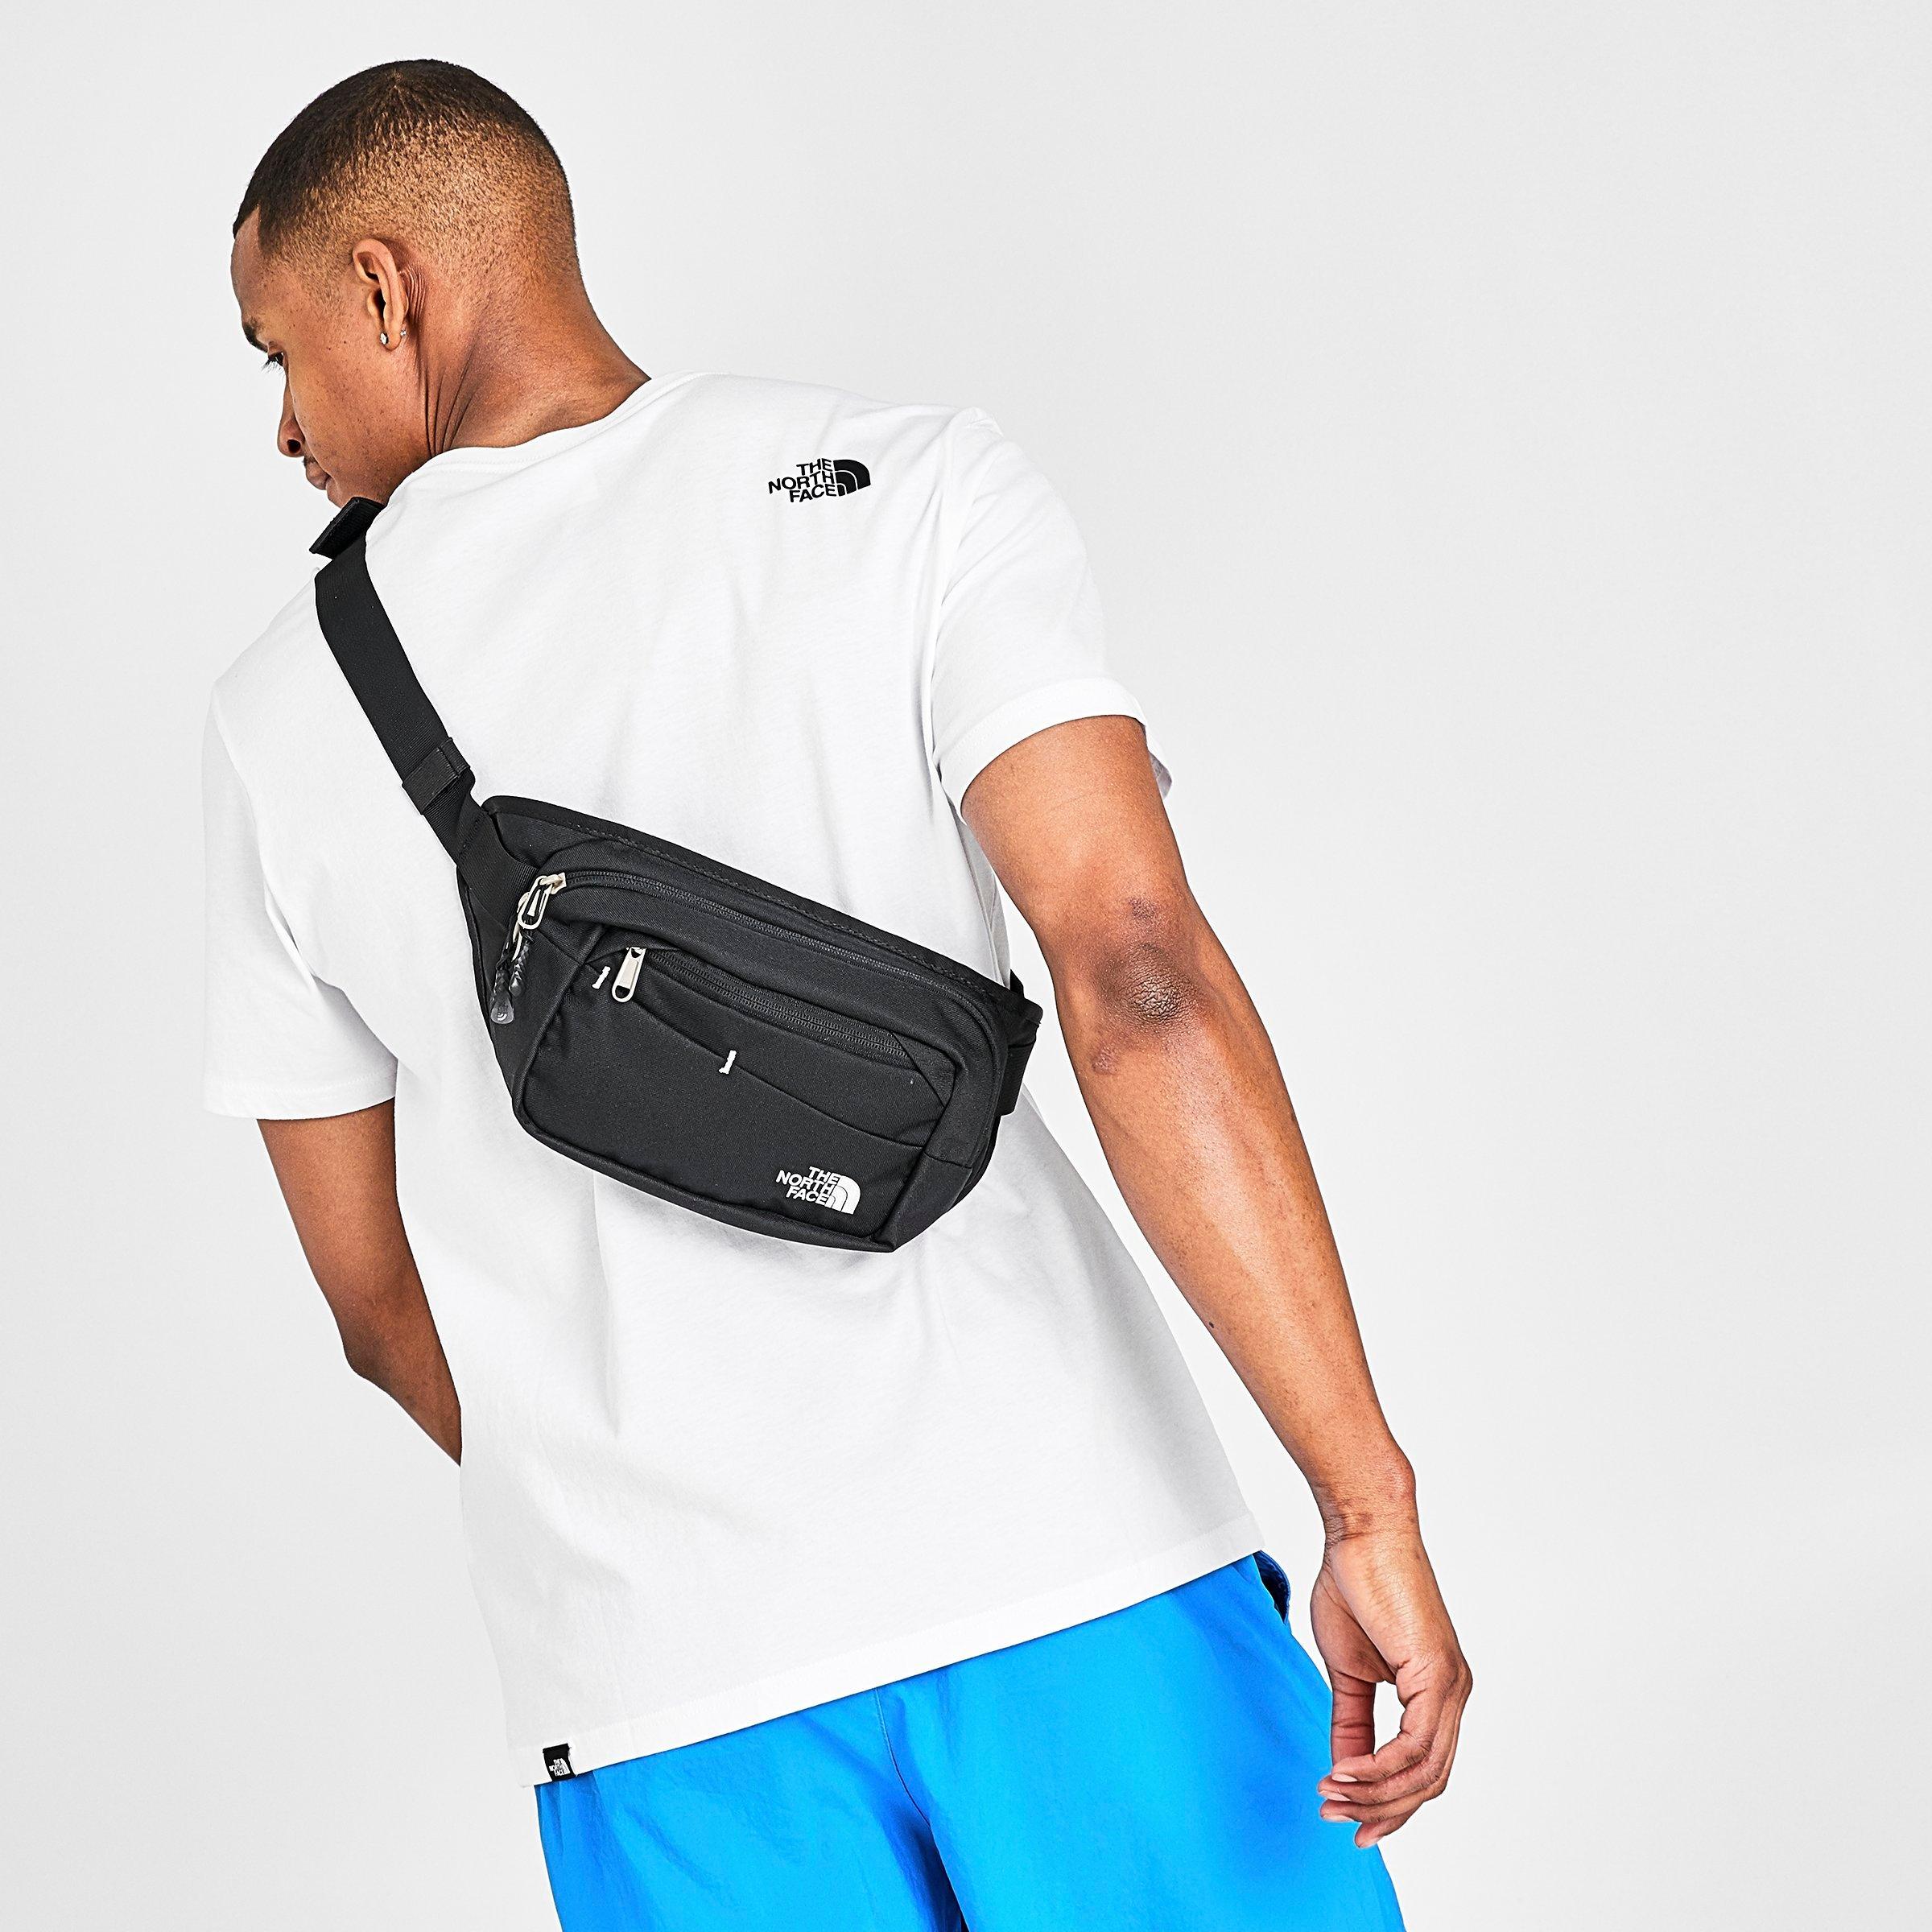 The North Face Bozer II Waist Pack 